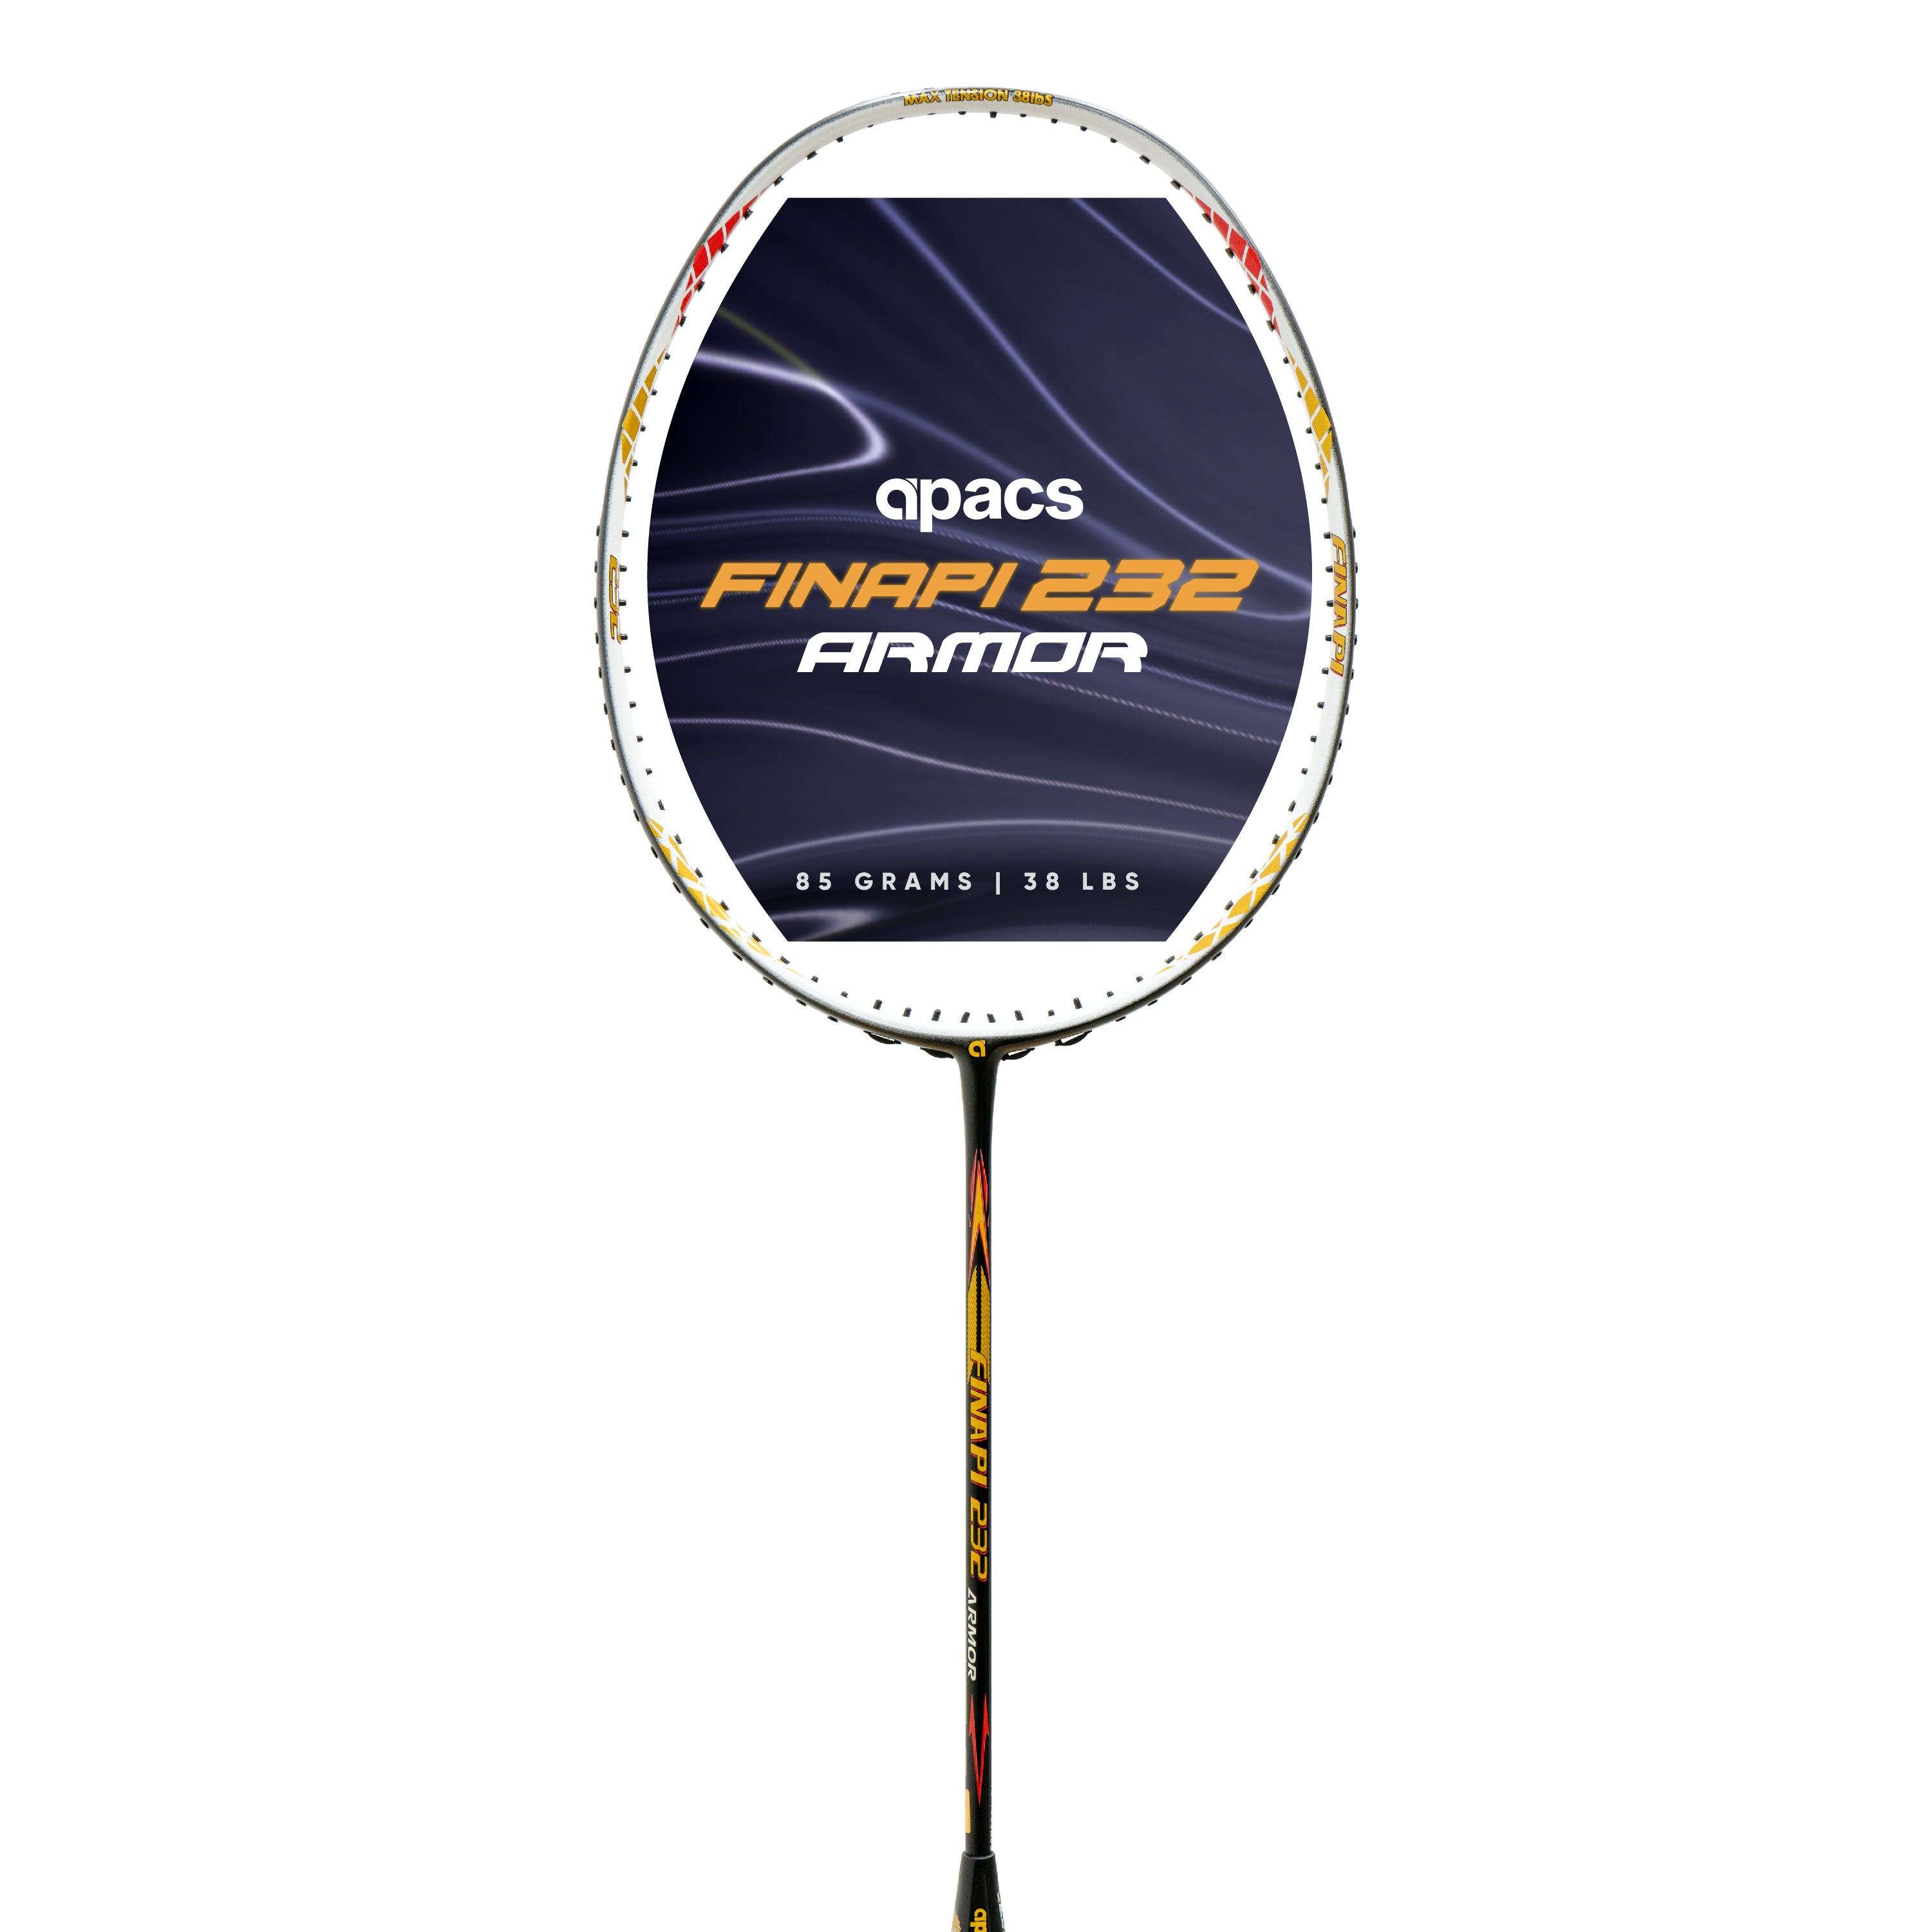 Apacs Finapi 232 Armor 38LBS Max Tension High Modulus Graphite Power Frame Unstrung Badminton Racket with Free Full Cover